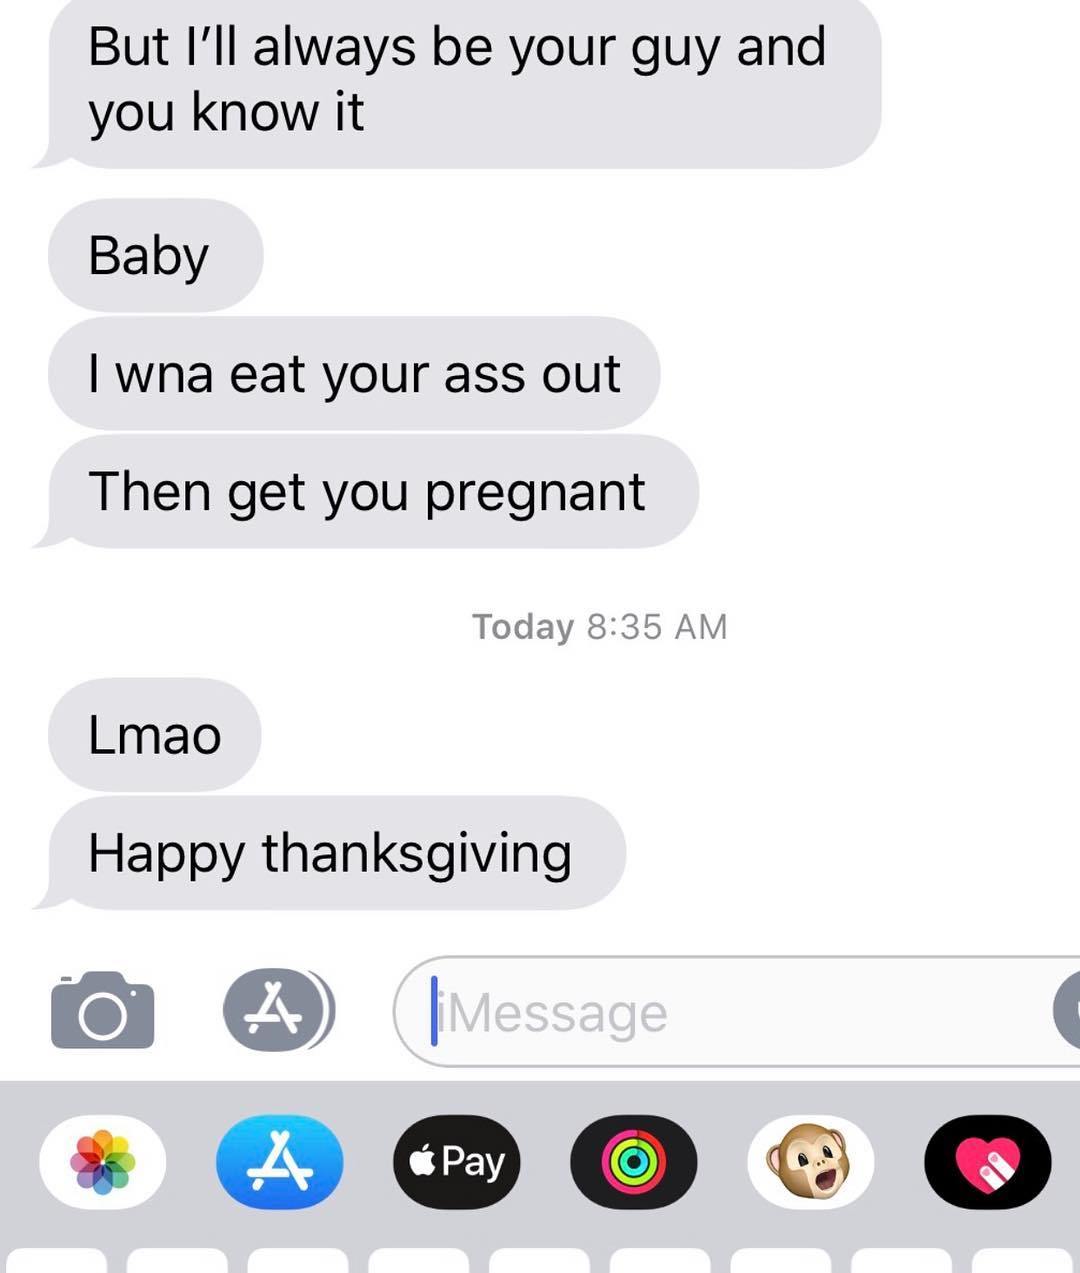 im done texting yall females moe - But I'll always be your guy and you know it Baby Iwna eat your ass out Then get you pregnant Today Lmao Happy thanksgiving o A Message Pay